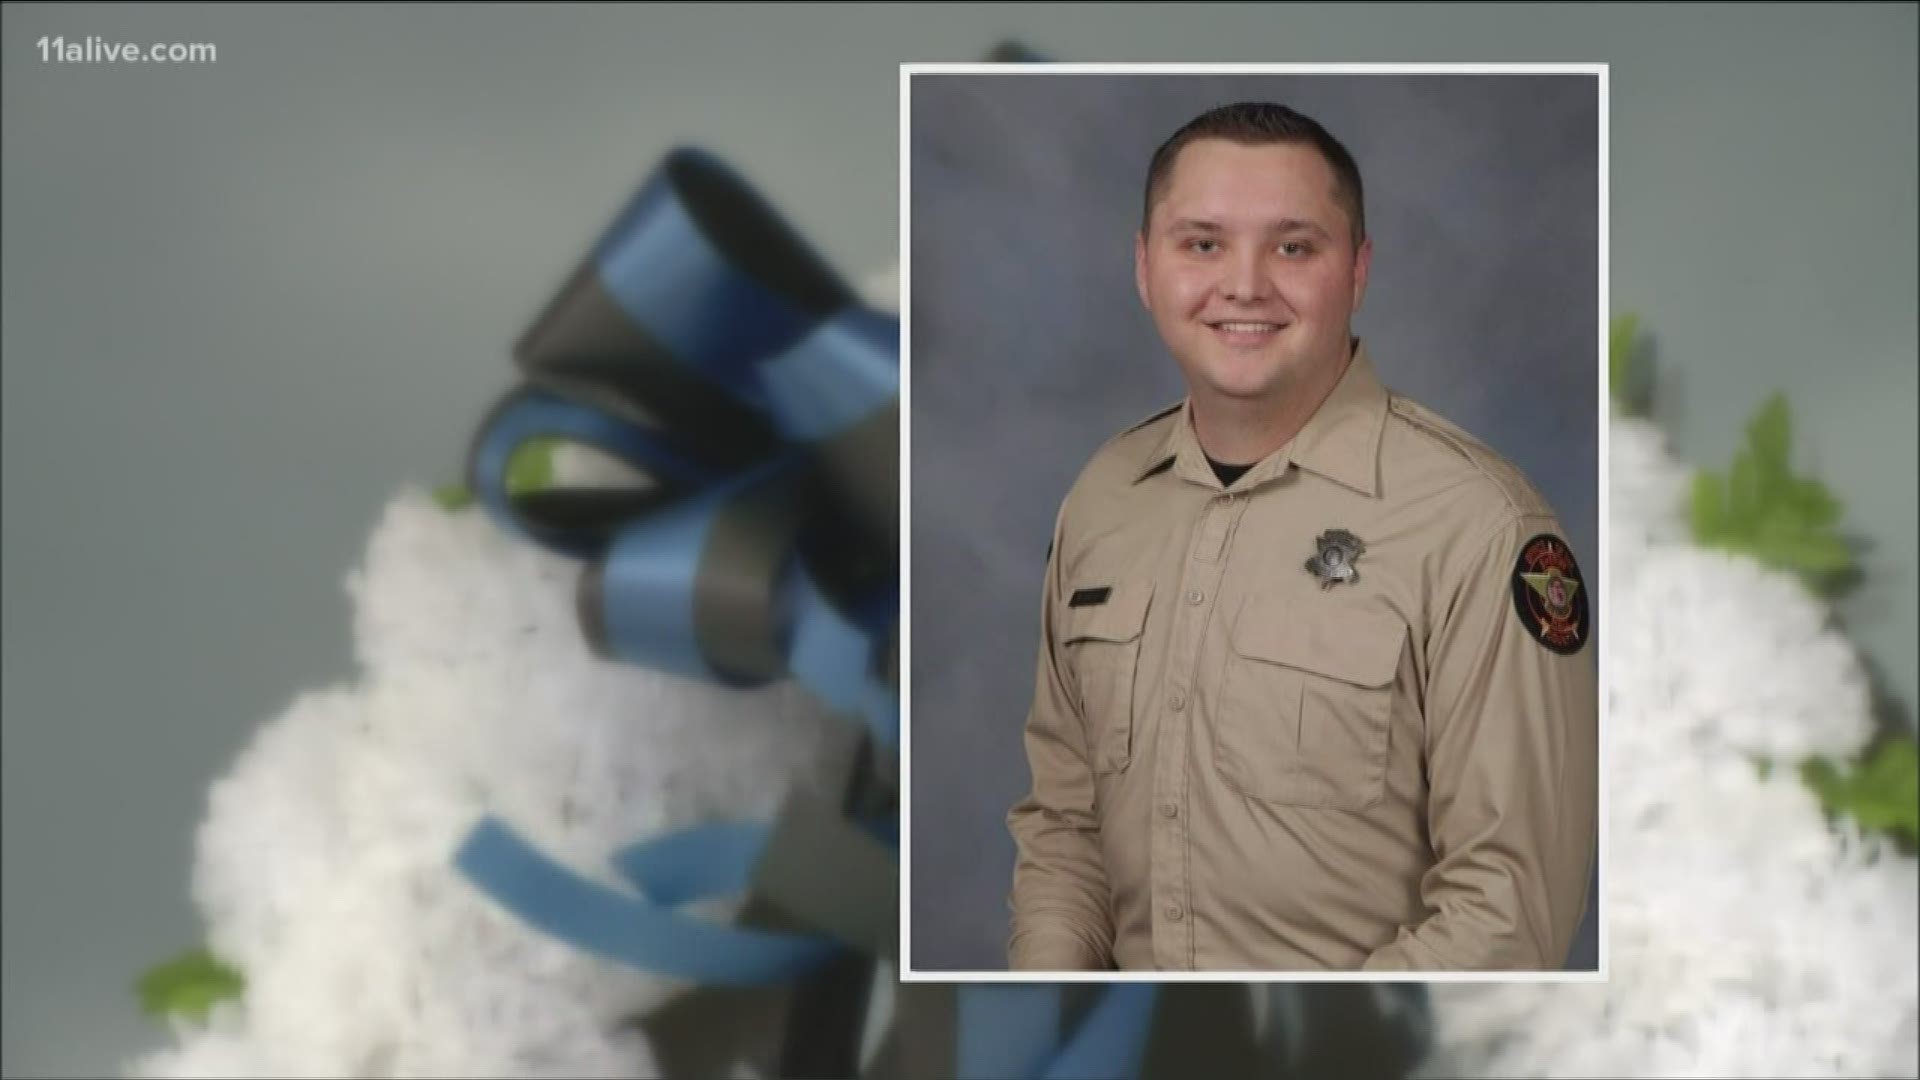 The Hall County Sheriff's Office said Monday afternoon that all four suspects were in custody in connection with the shooting death of Deputy Nicolas Dixon.